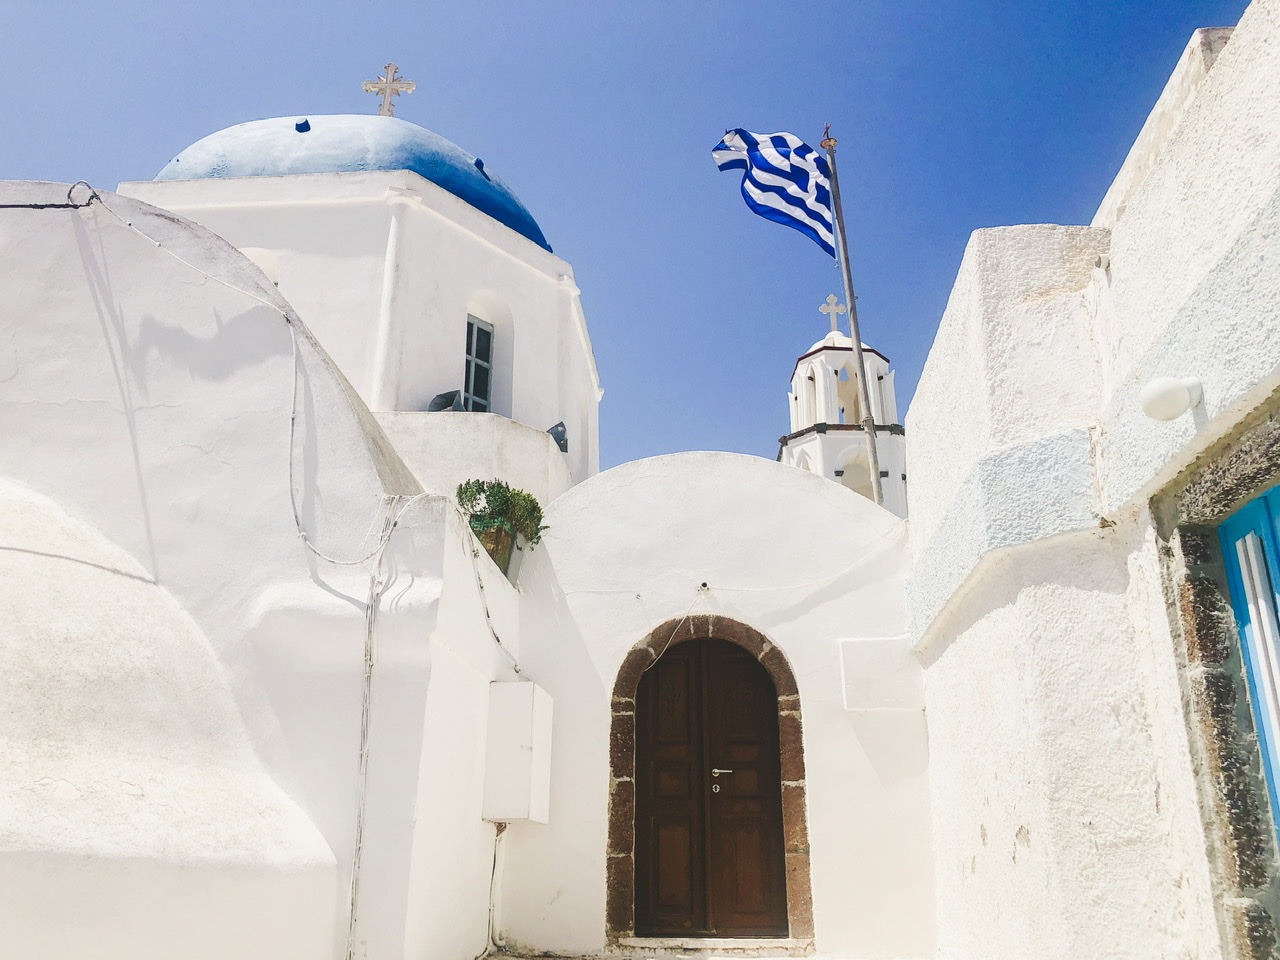 White church with blue dome and brown wooden door with greek flag flying in Santorini